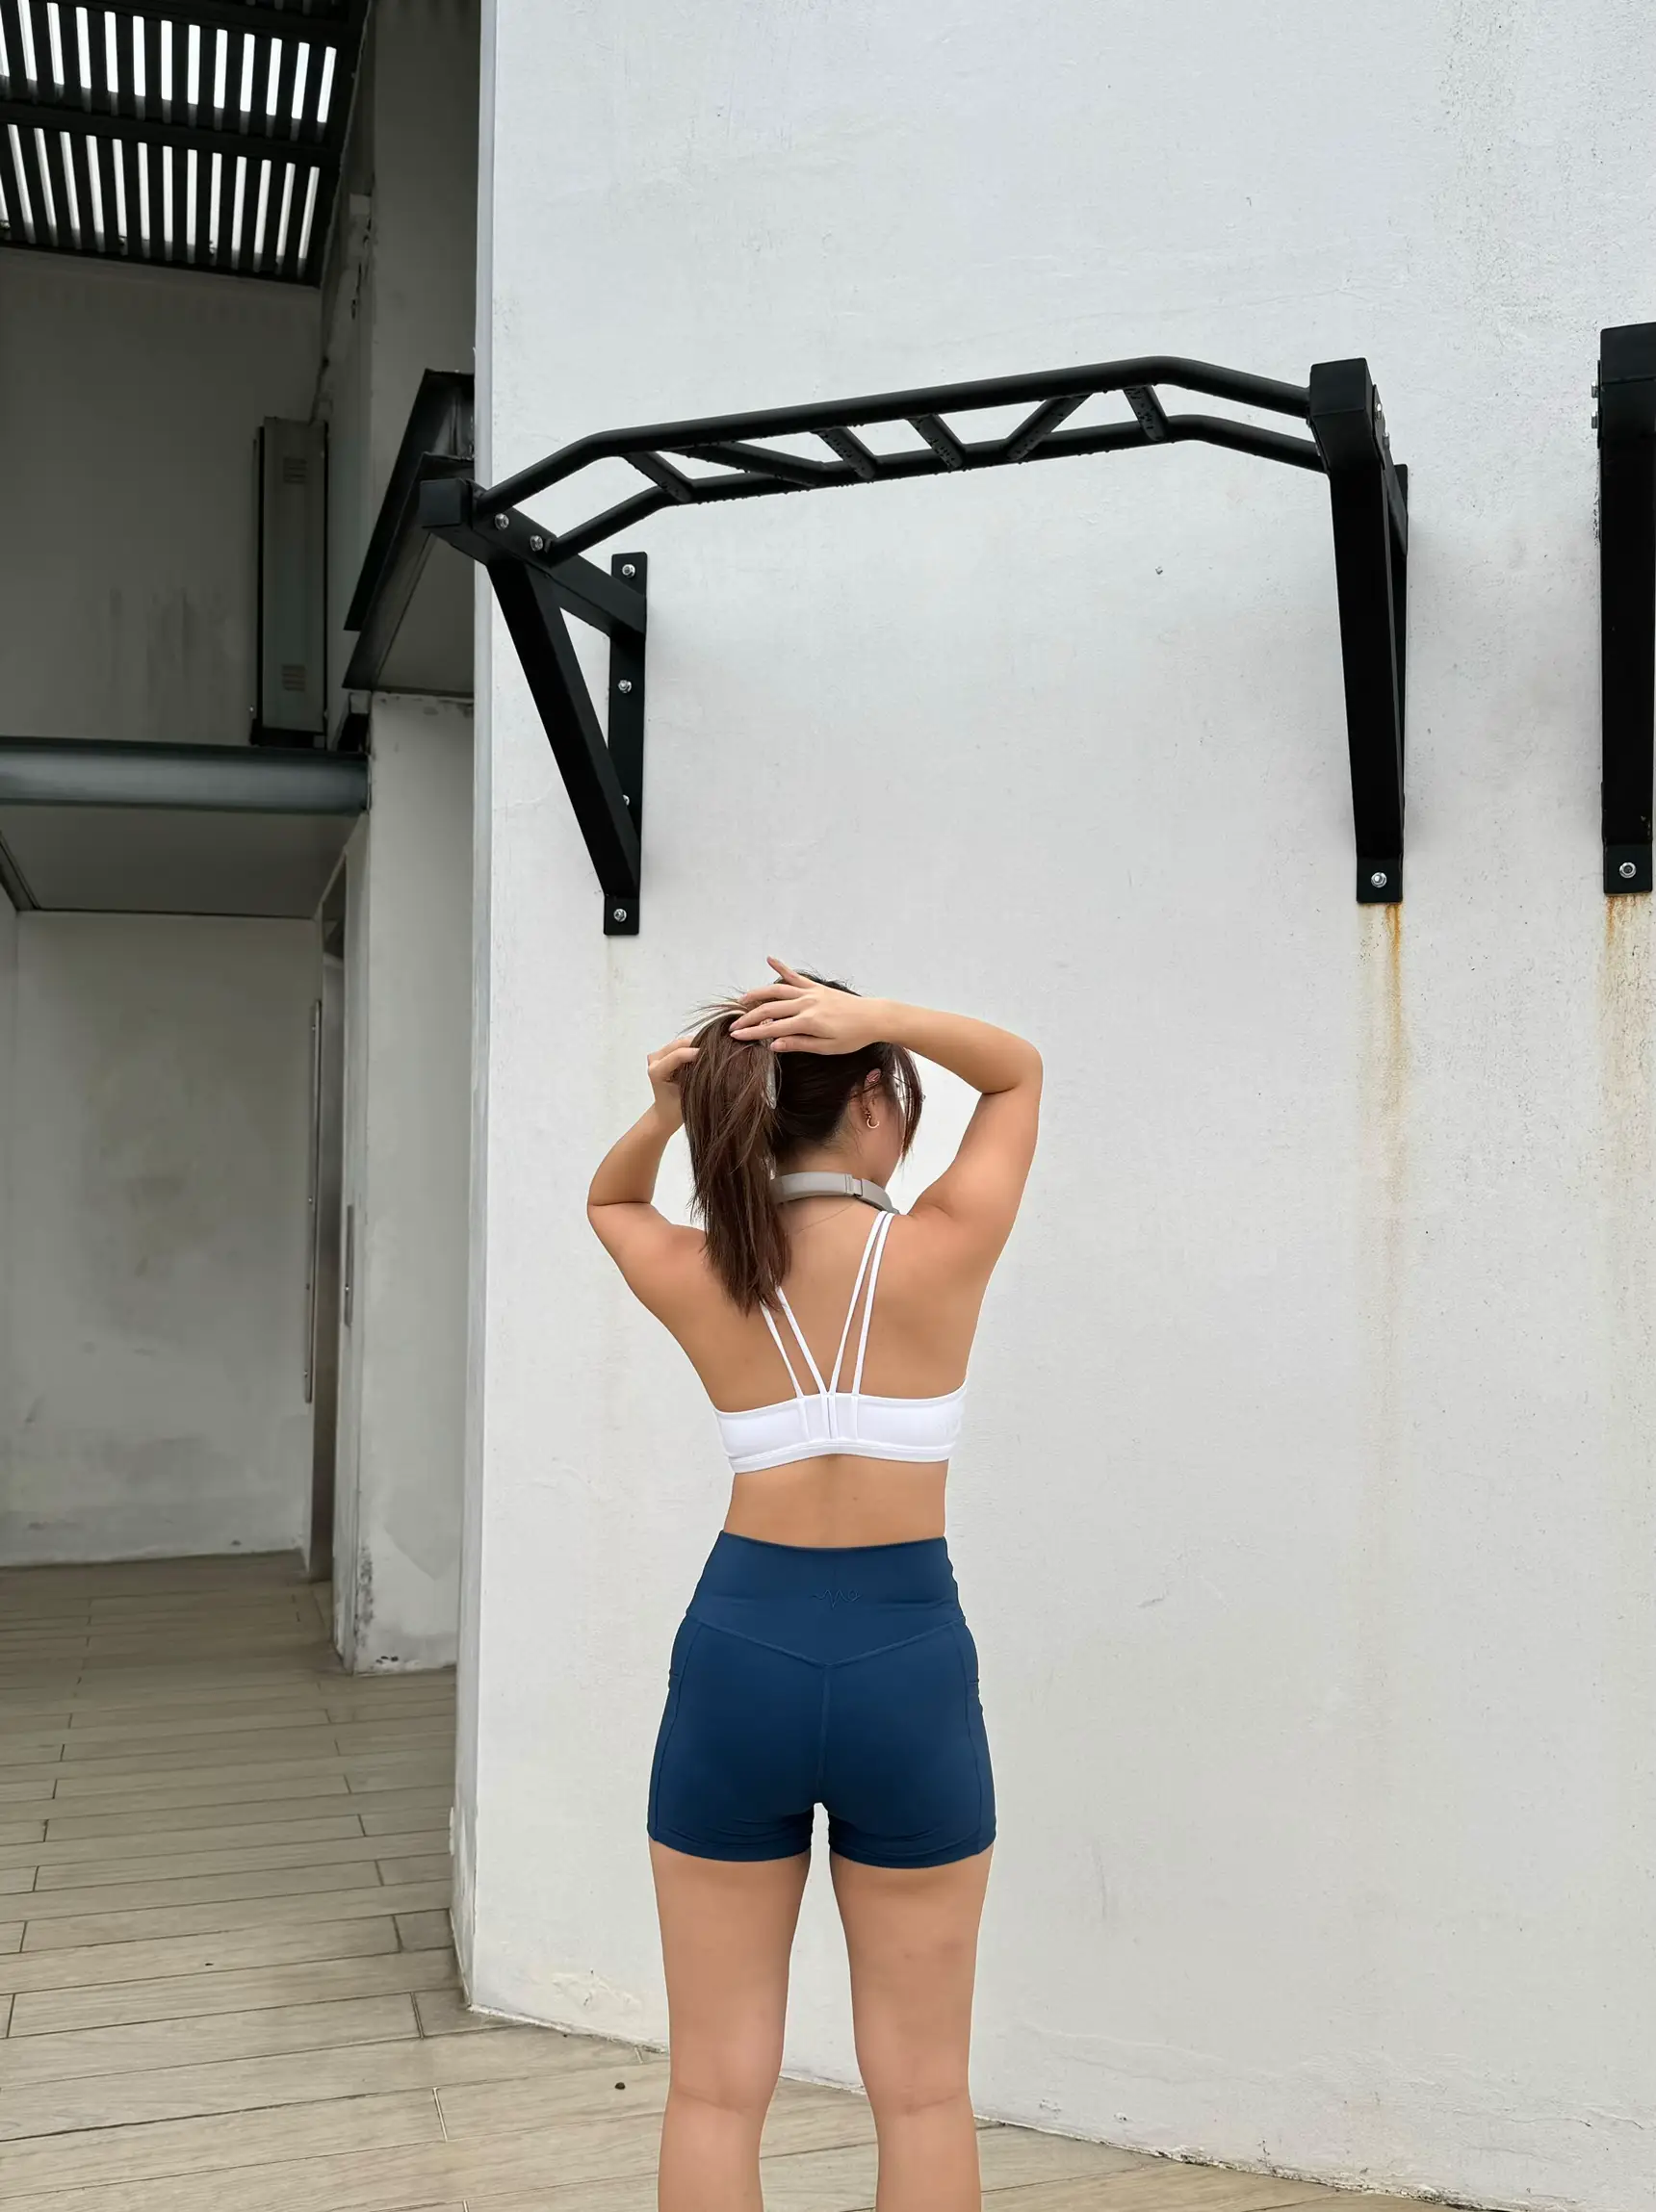 THE BEST SPORTS BRA FOR SMALL CHESTED GIRLS 🏃🏻